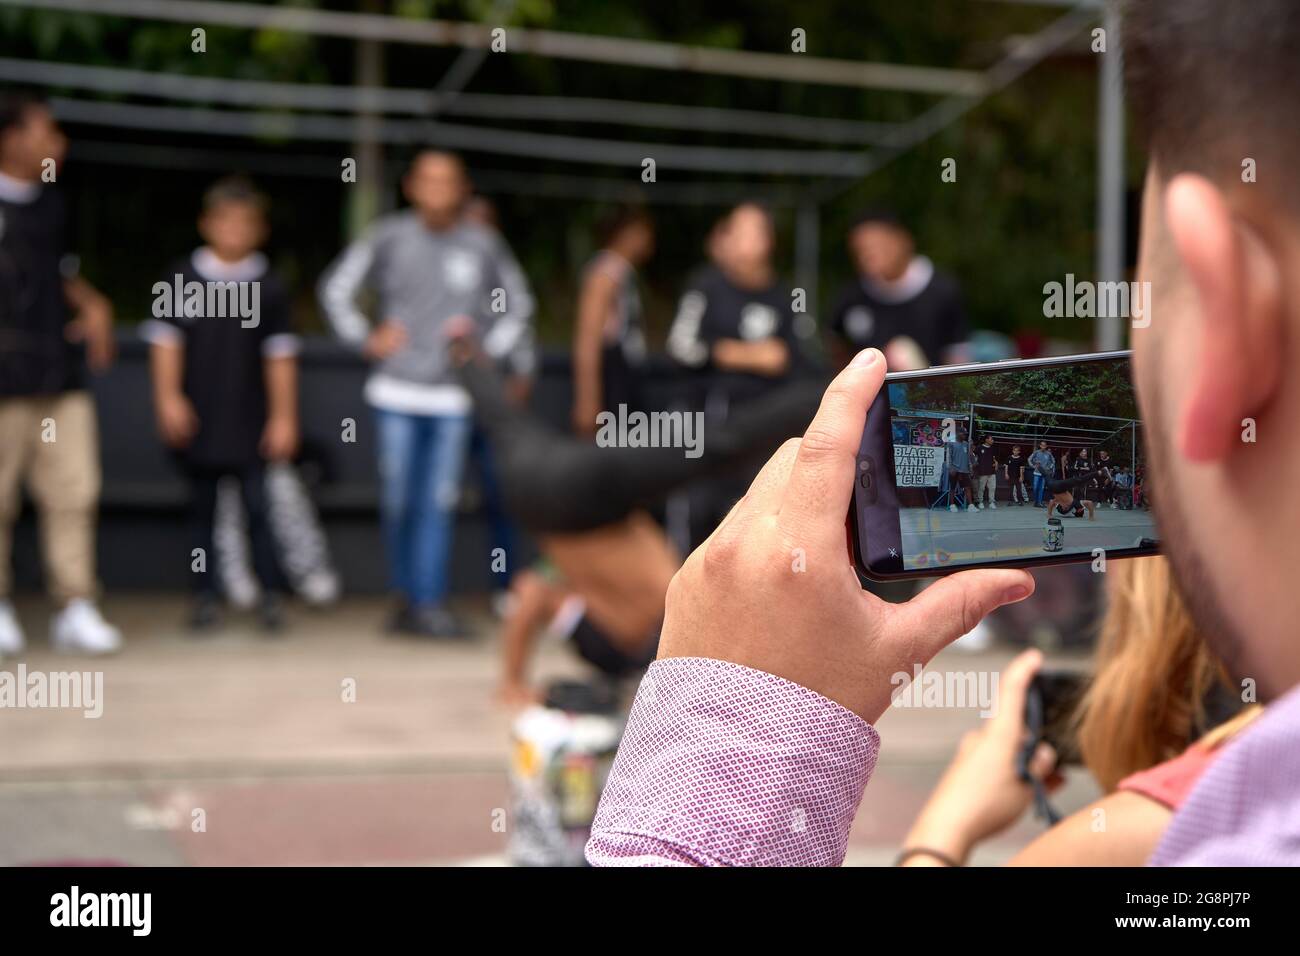 MEDELLIN, COLOMBIA - Nov 30, 2019: A young man recording the street dance performance in Medellin, Colombia Stock Photo